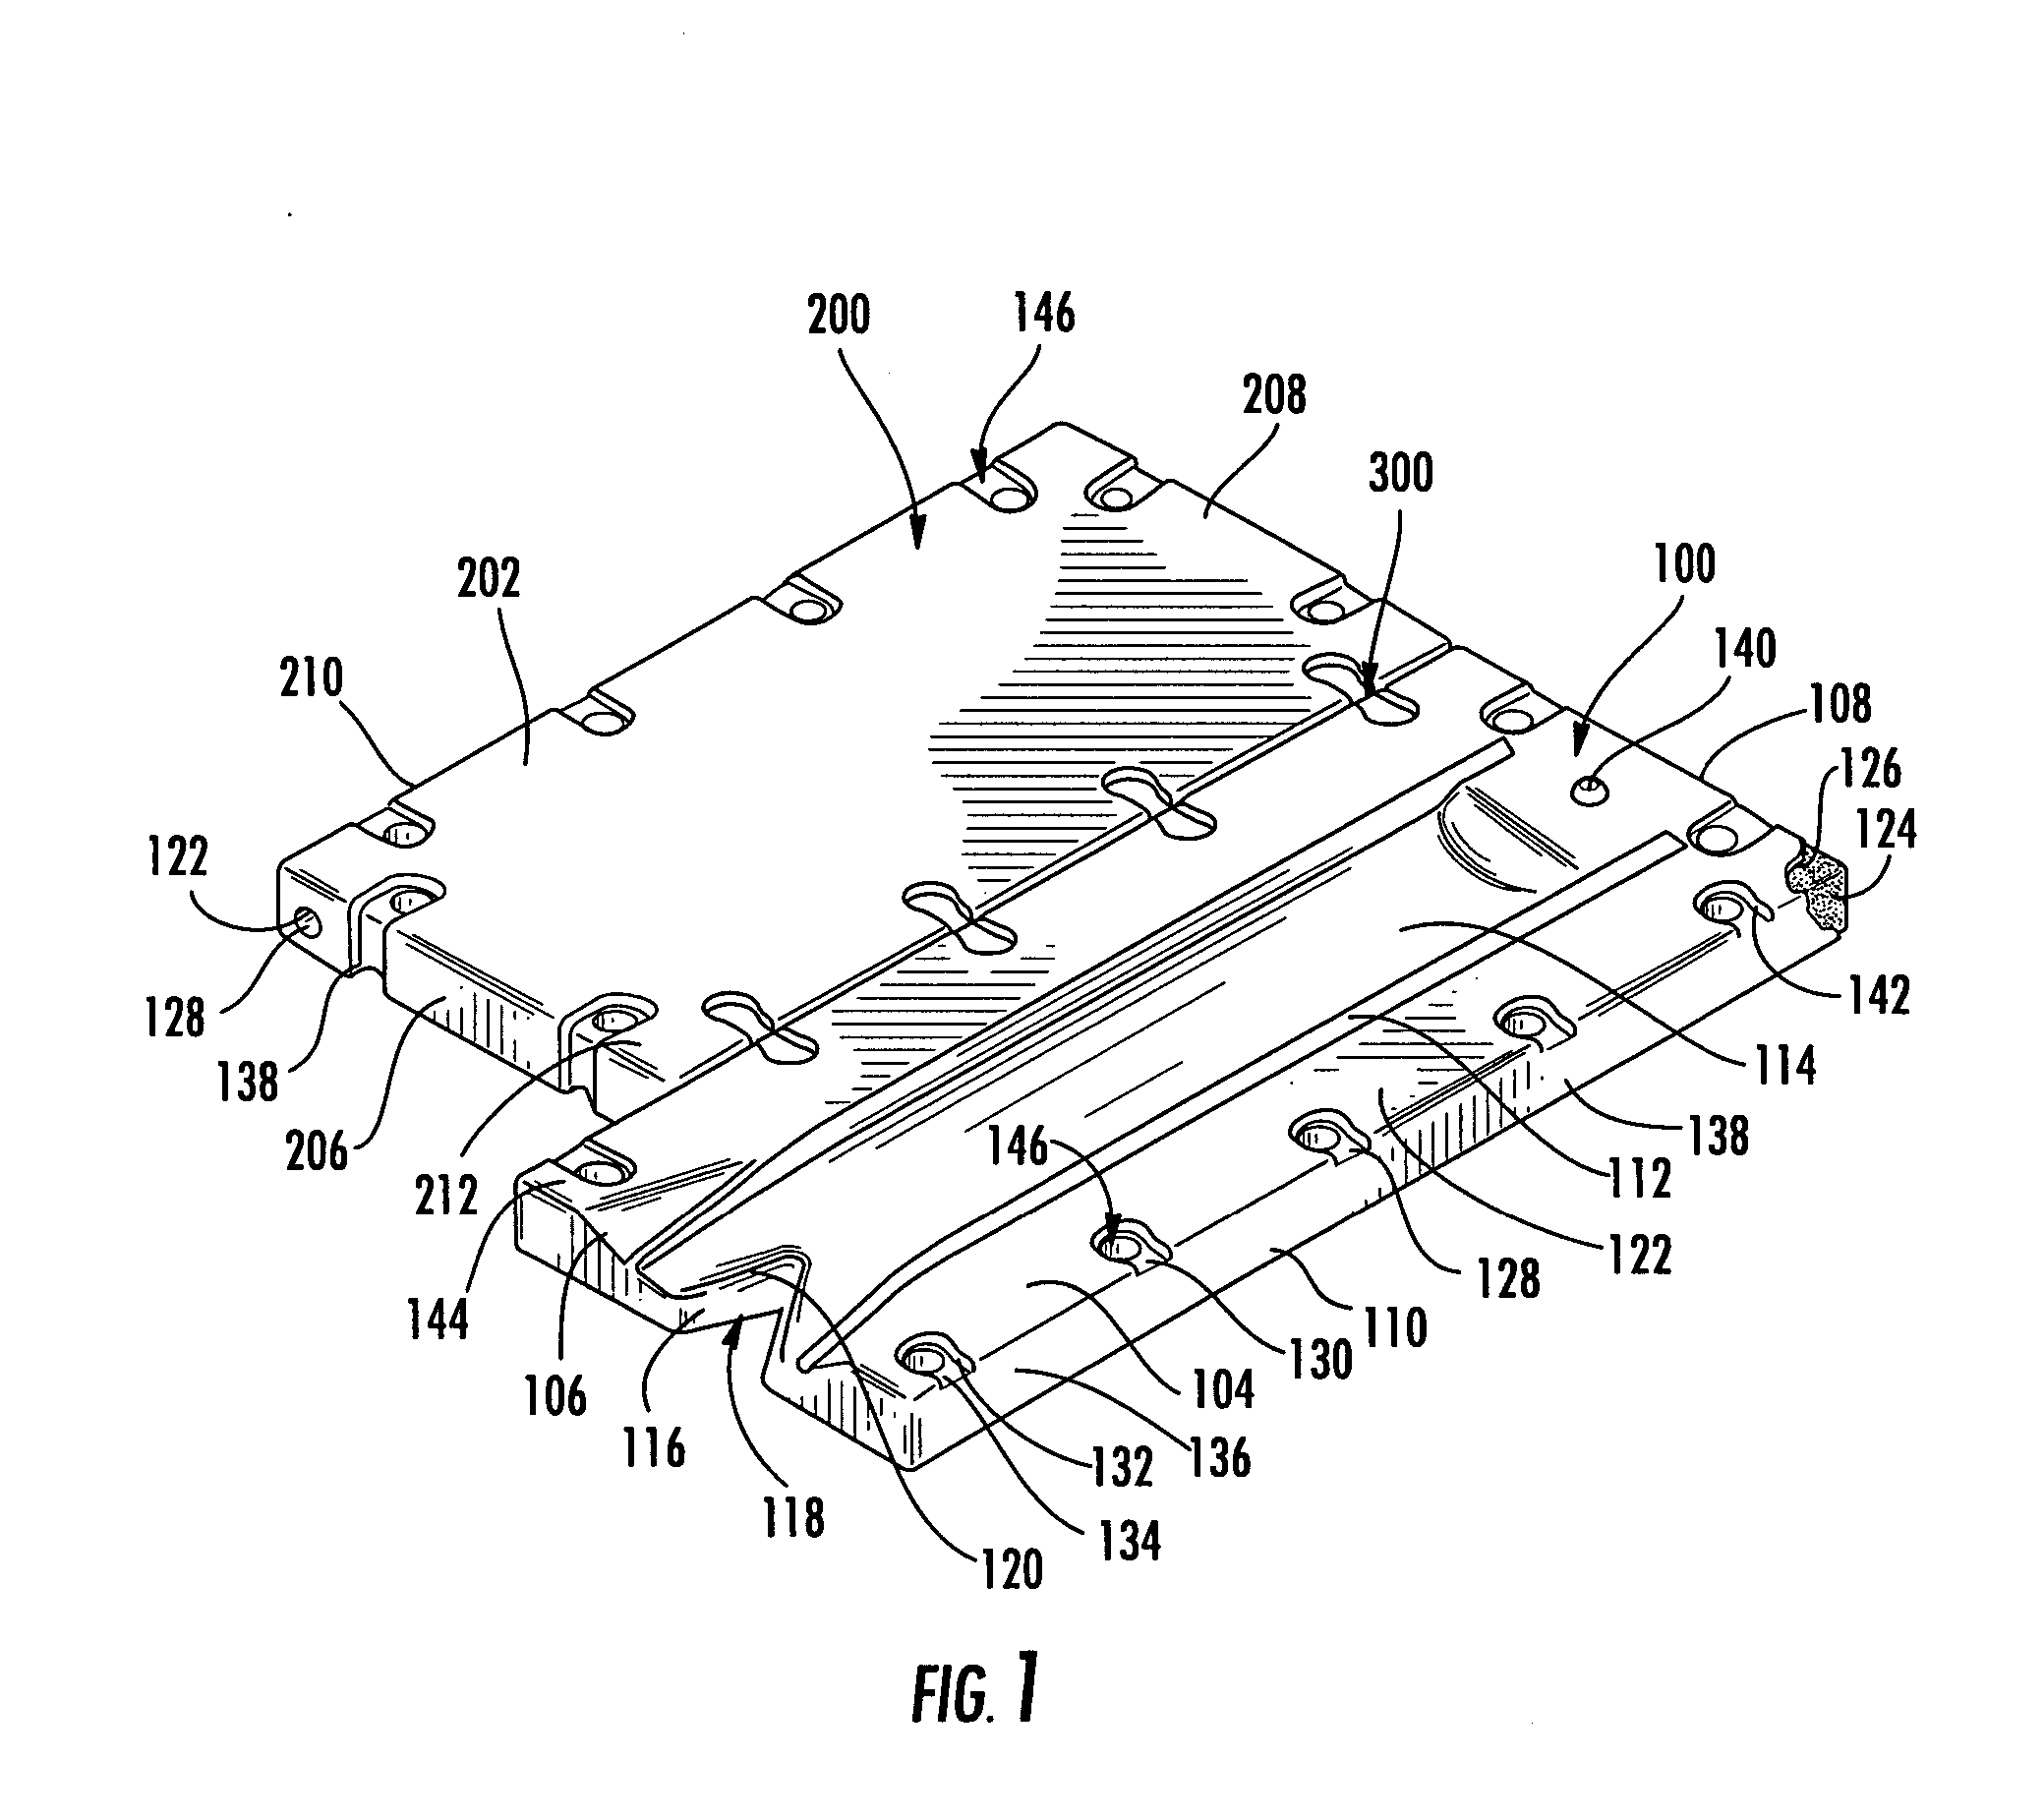 Connecting link assembly and socket arrangement for assembly of floating drive-on dry docks